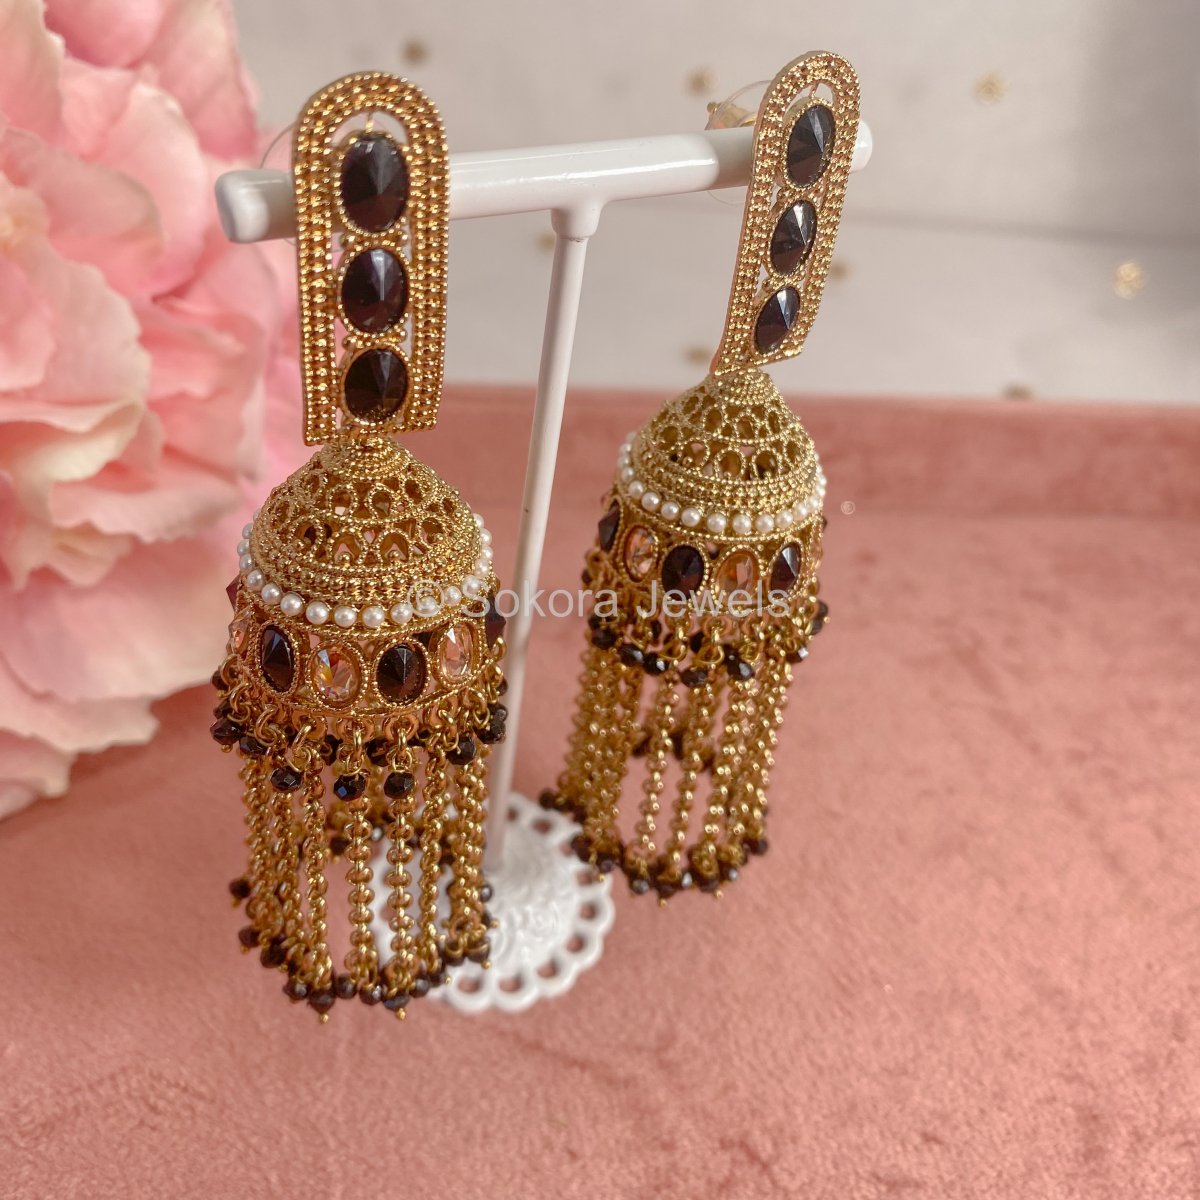 Gold Jhumka Earrings in Delhi at best price by Gold & Silverkings Pvt Ltd -  Justdial